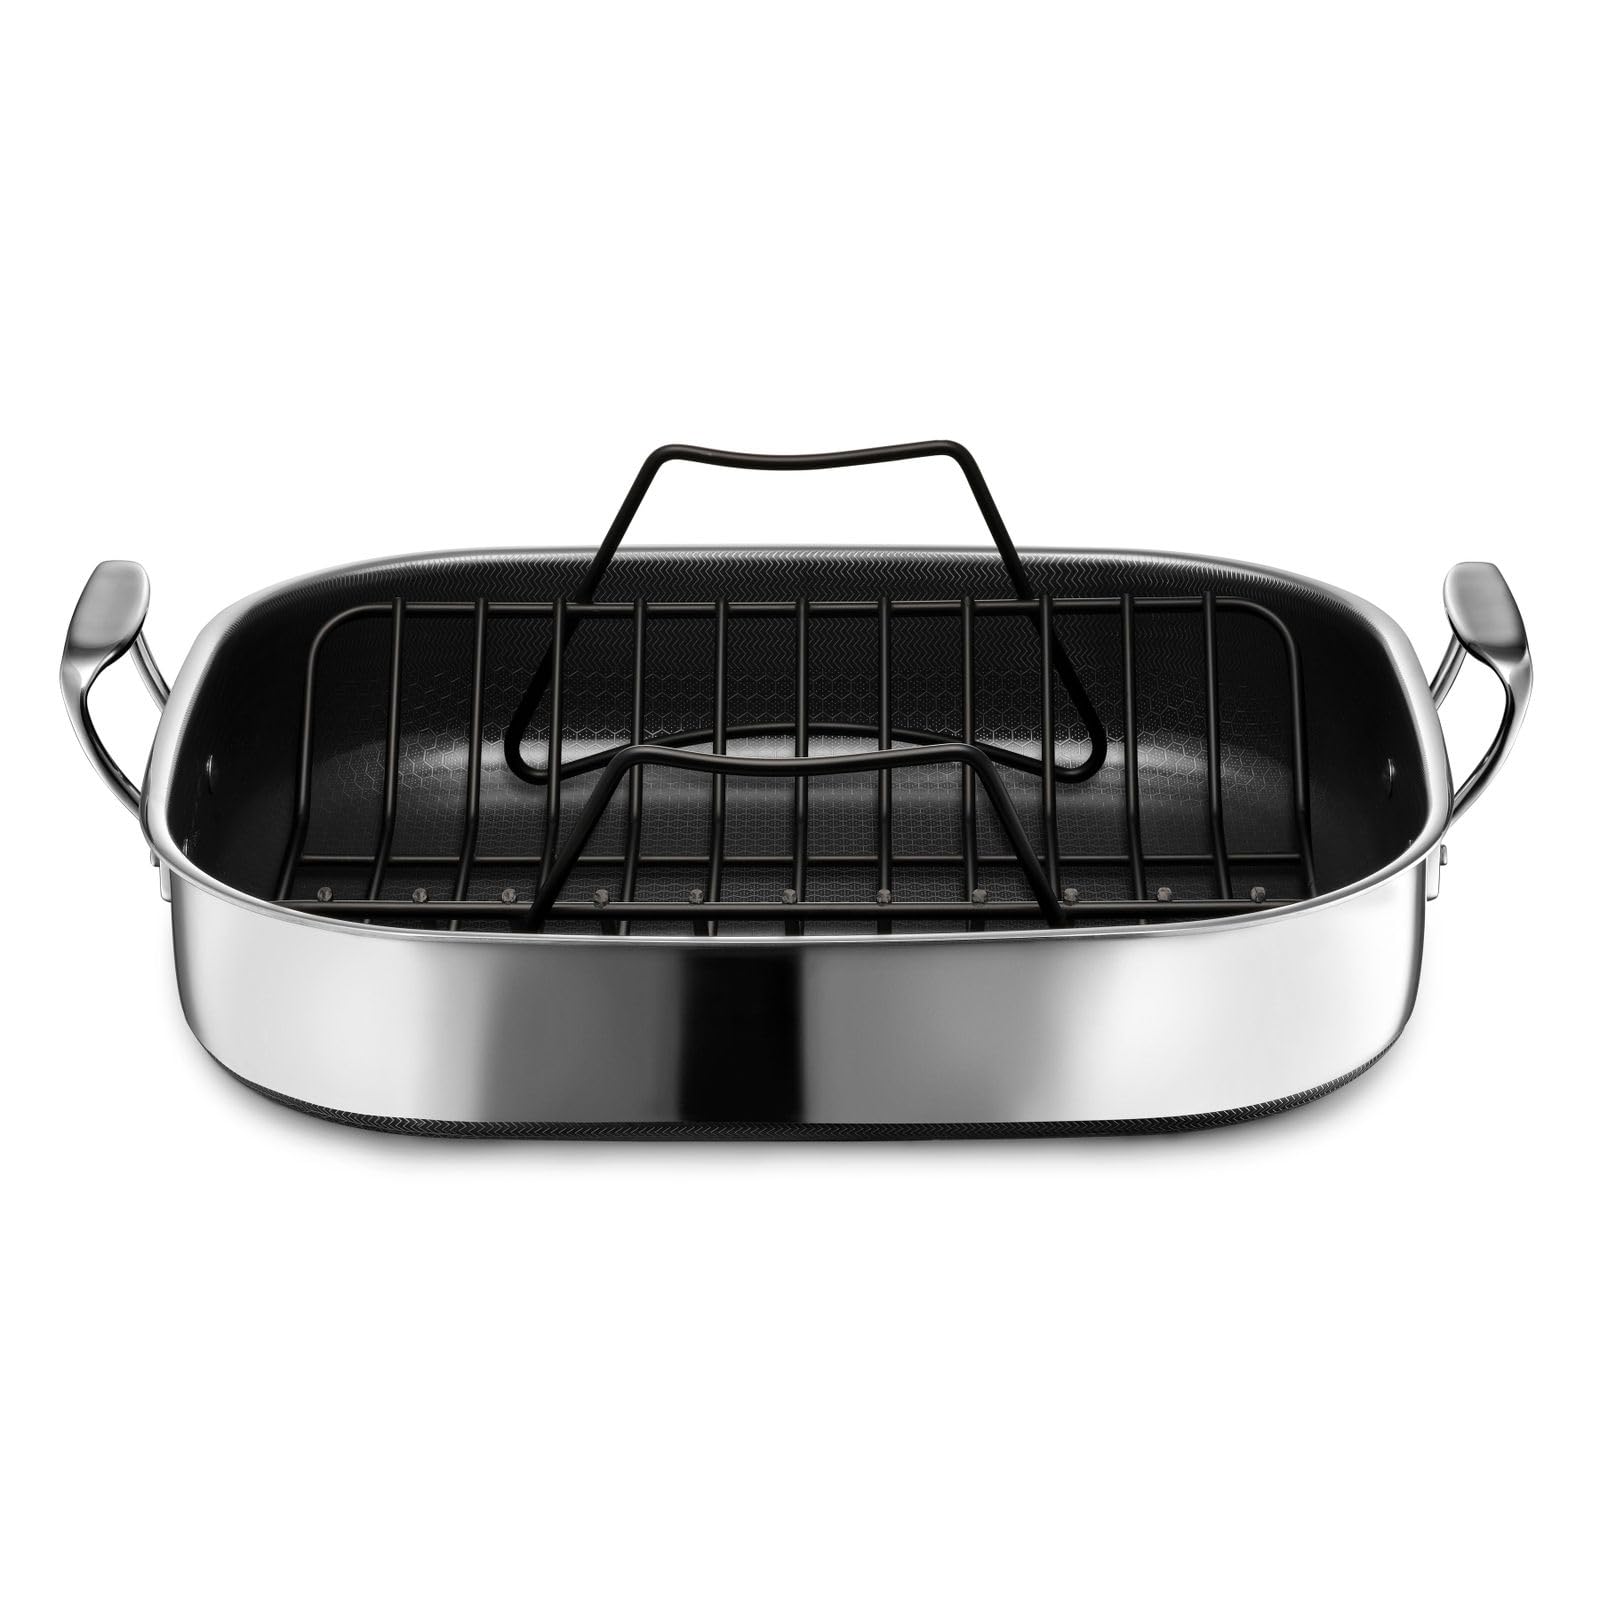 Nonstick Roasting Pan with Rack, Dishwasher and Oven Friendly, Compatible with All Cooktops